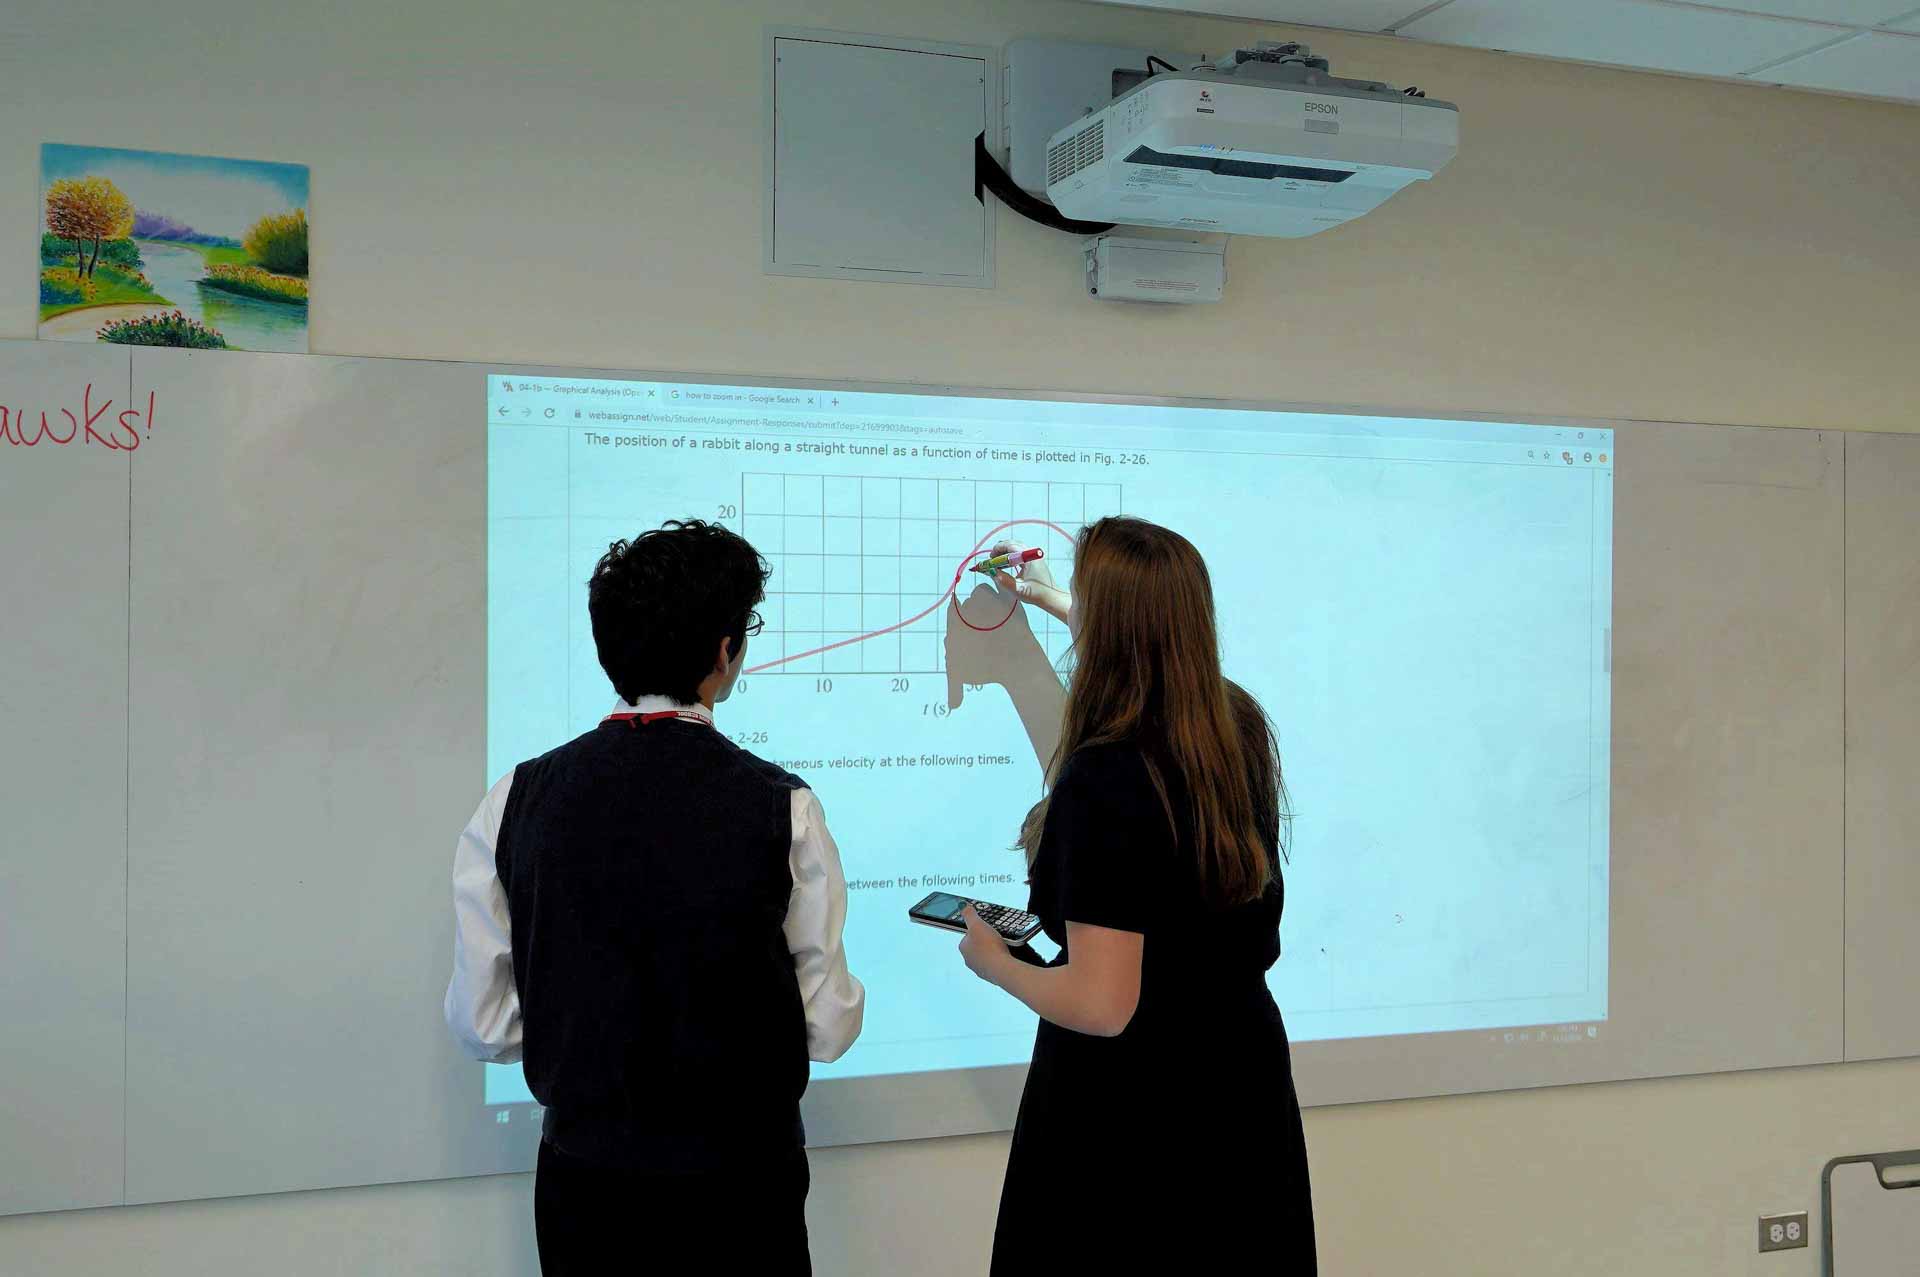 monastery-hall-dedication-teacher-and-student-at-white-board-with-projector-own